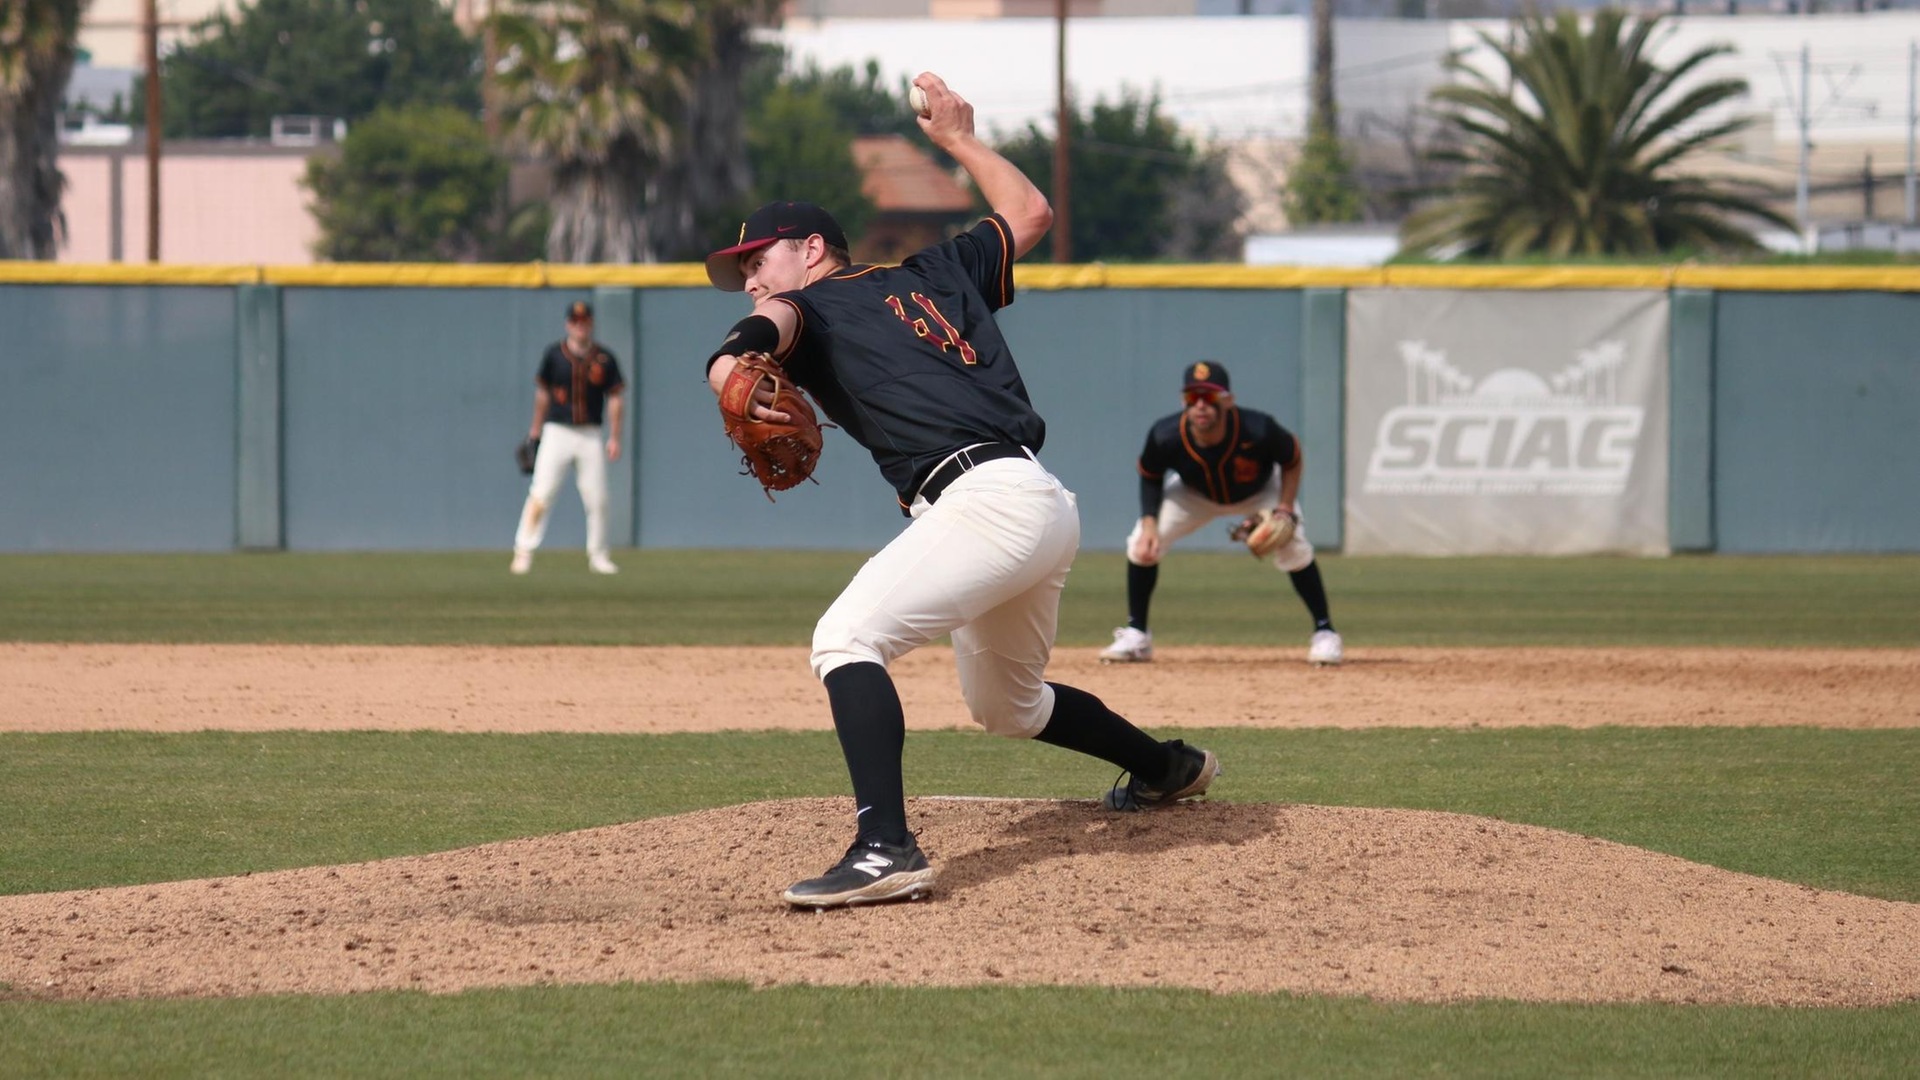 Parker McGraw threw four shutout innings in his first start (photo by Thomas Walker)